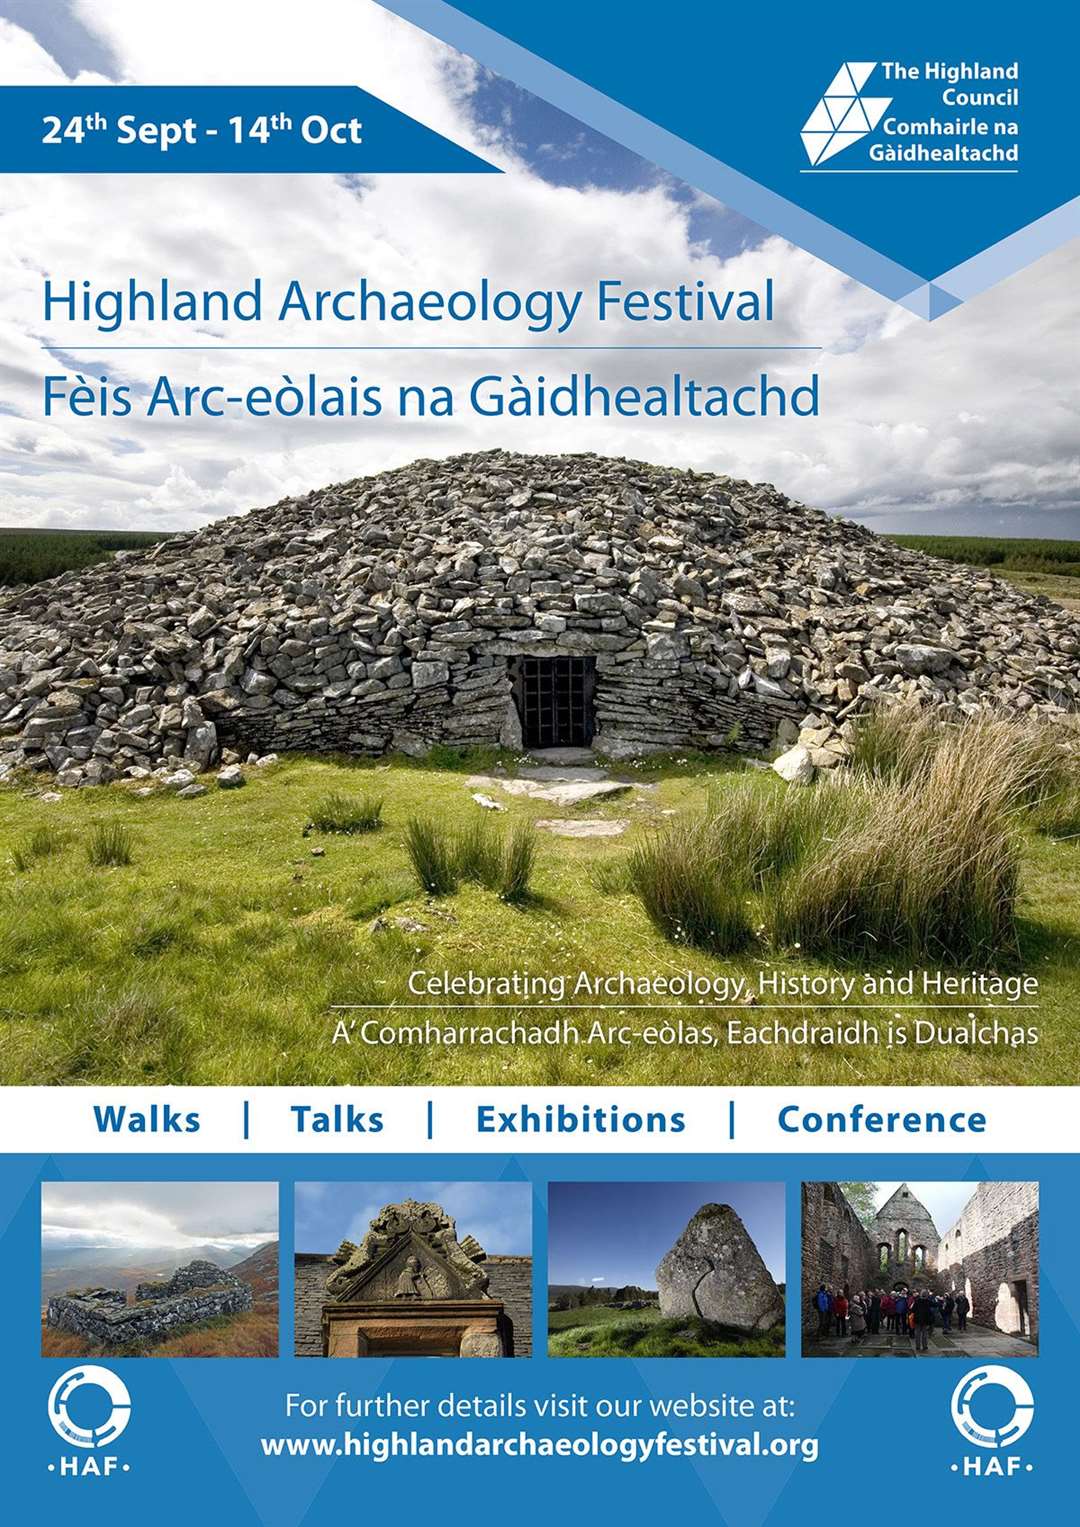 The Highland Archaeology Festival will run across the region between September 24 and October 1.